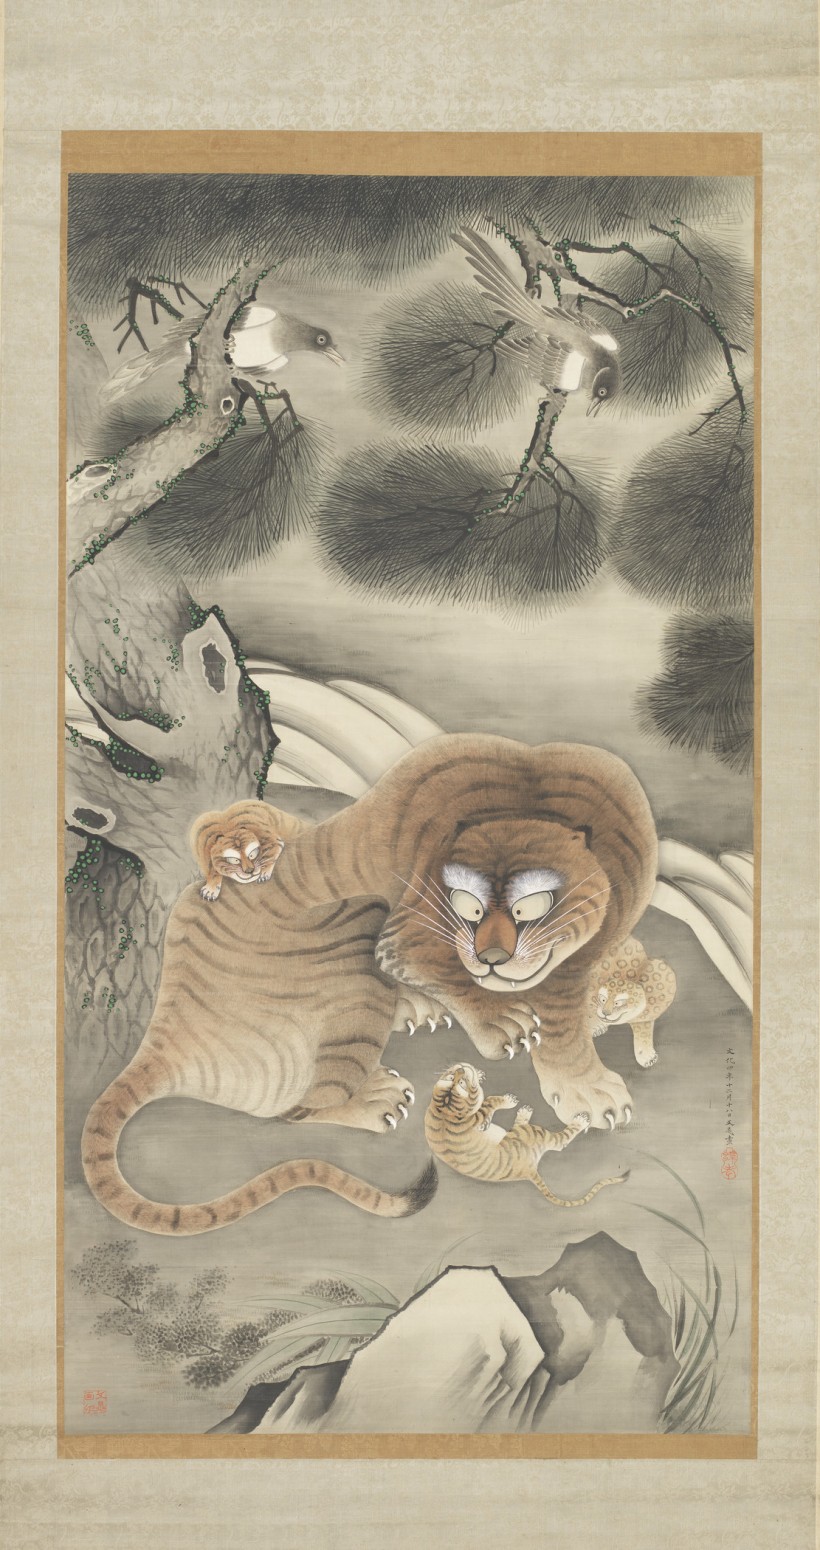 Image: Tani Bunchō, Japan, 1763-1840, Tiger Family and Magpies, 1807 (Bunka 4, 12th month, 18th day)